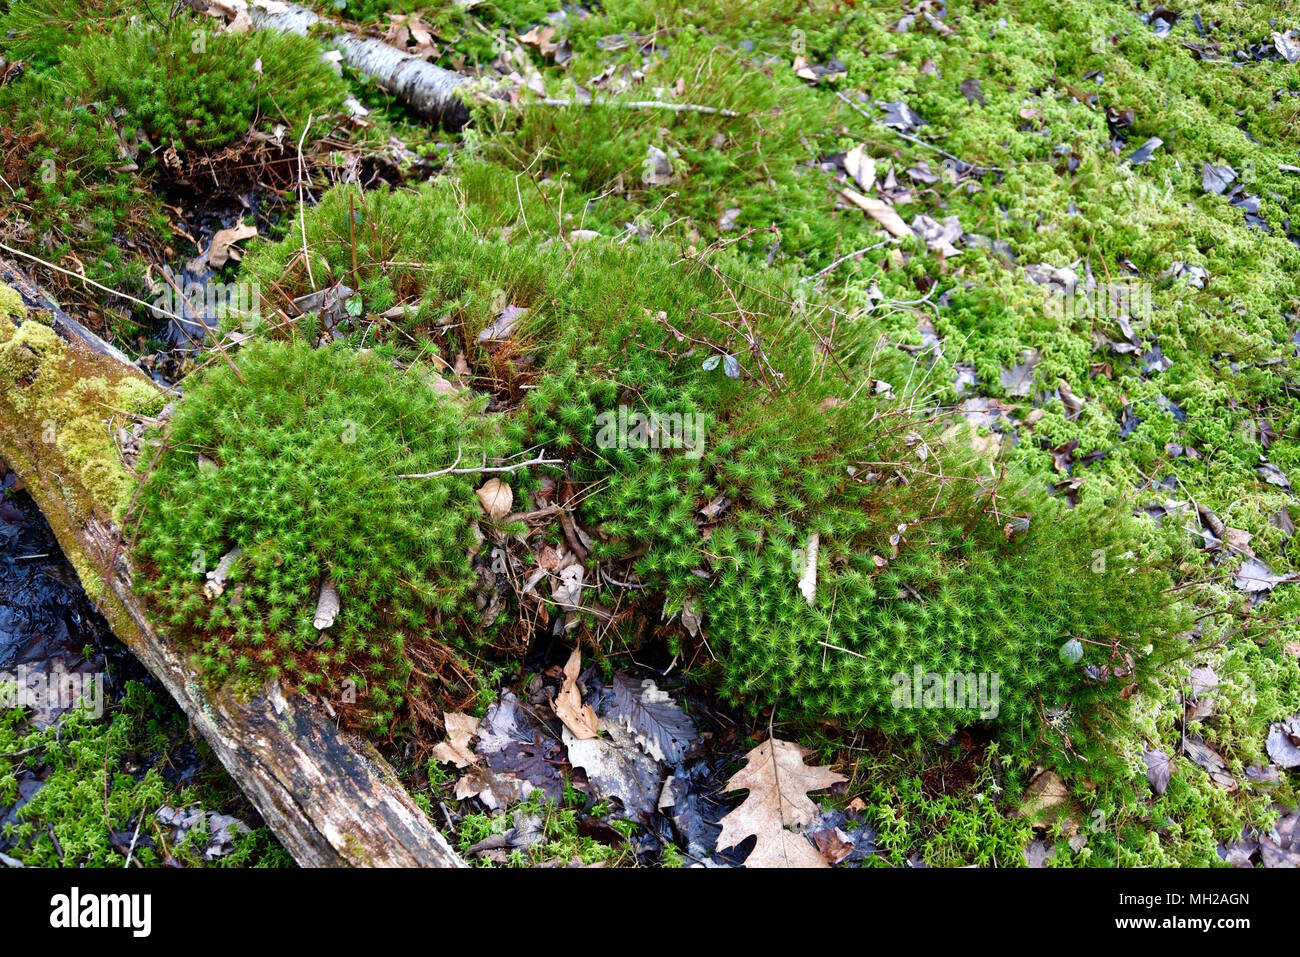 Sphagnum moss and other mosses growing in a spring forest. Stock Photo